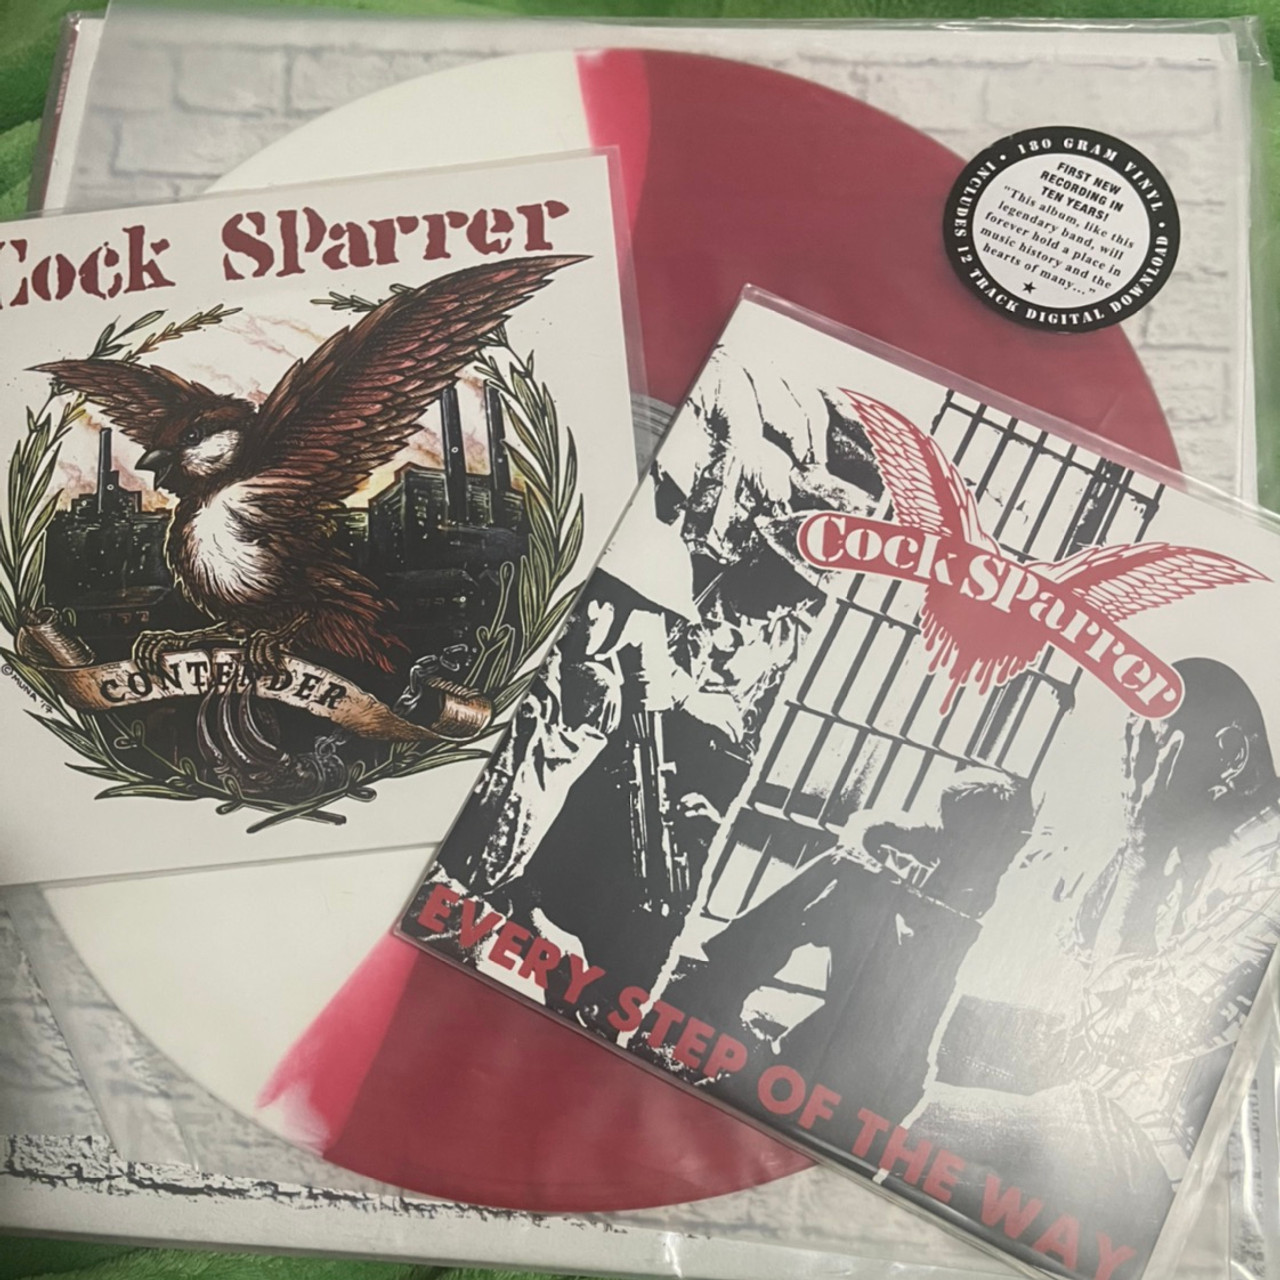 Cock Sparrer Forever Deluxe Edition Coloured Vinyl And 2 Bonus 7” Picture Sleeves The 